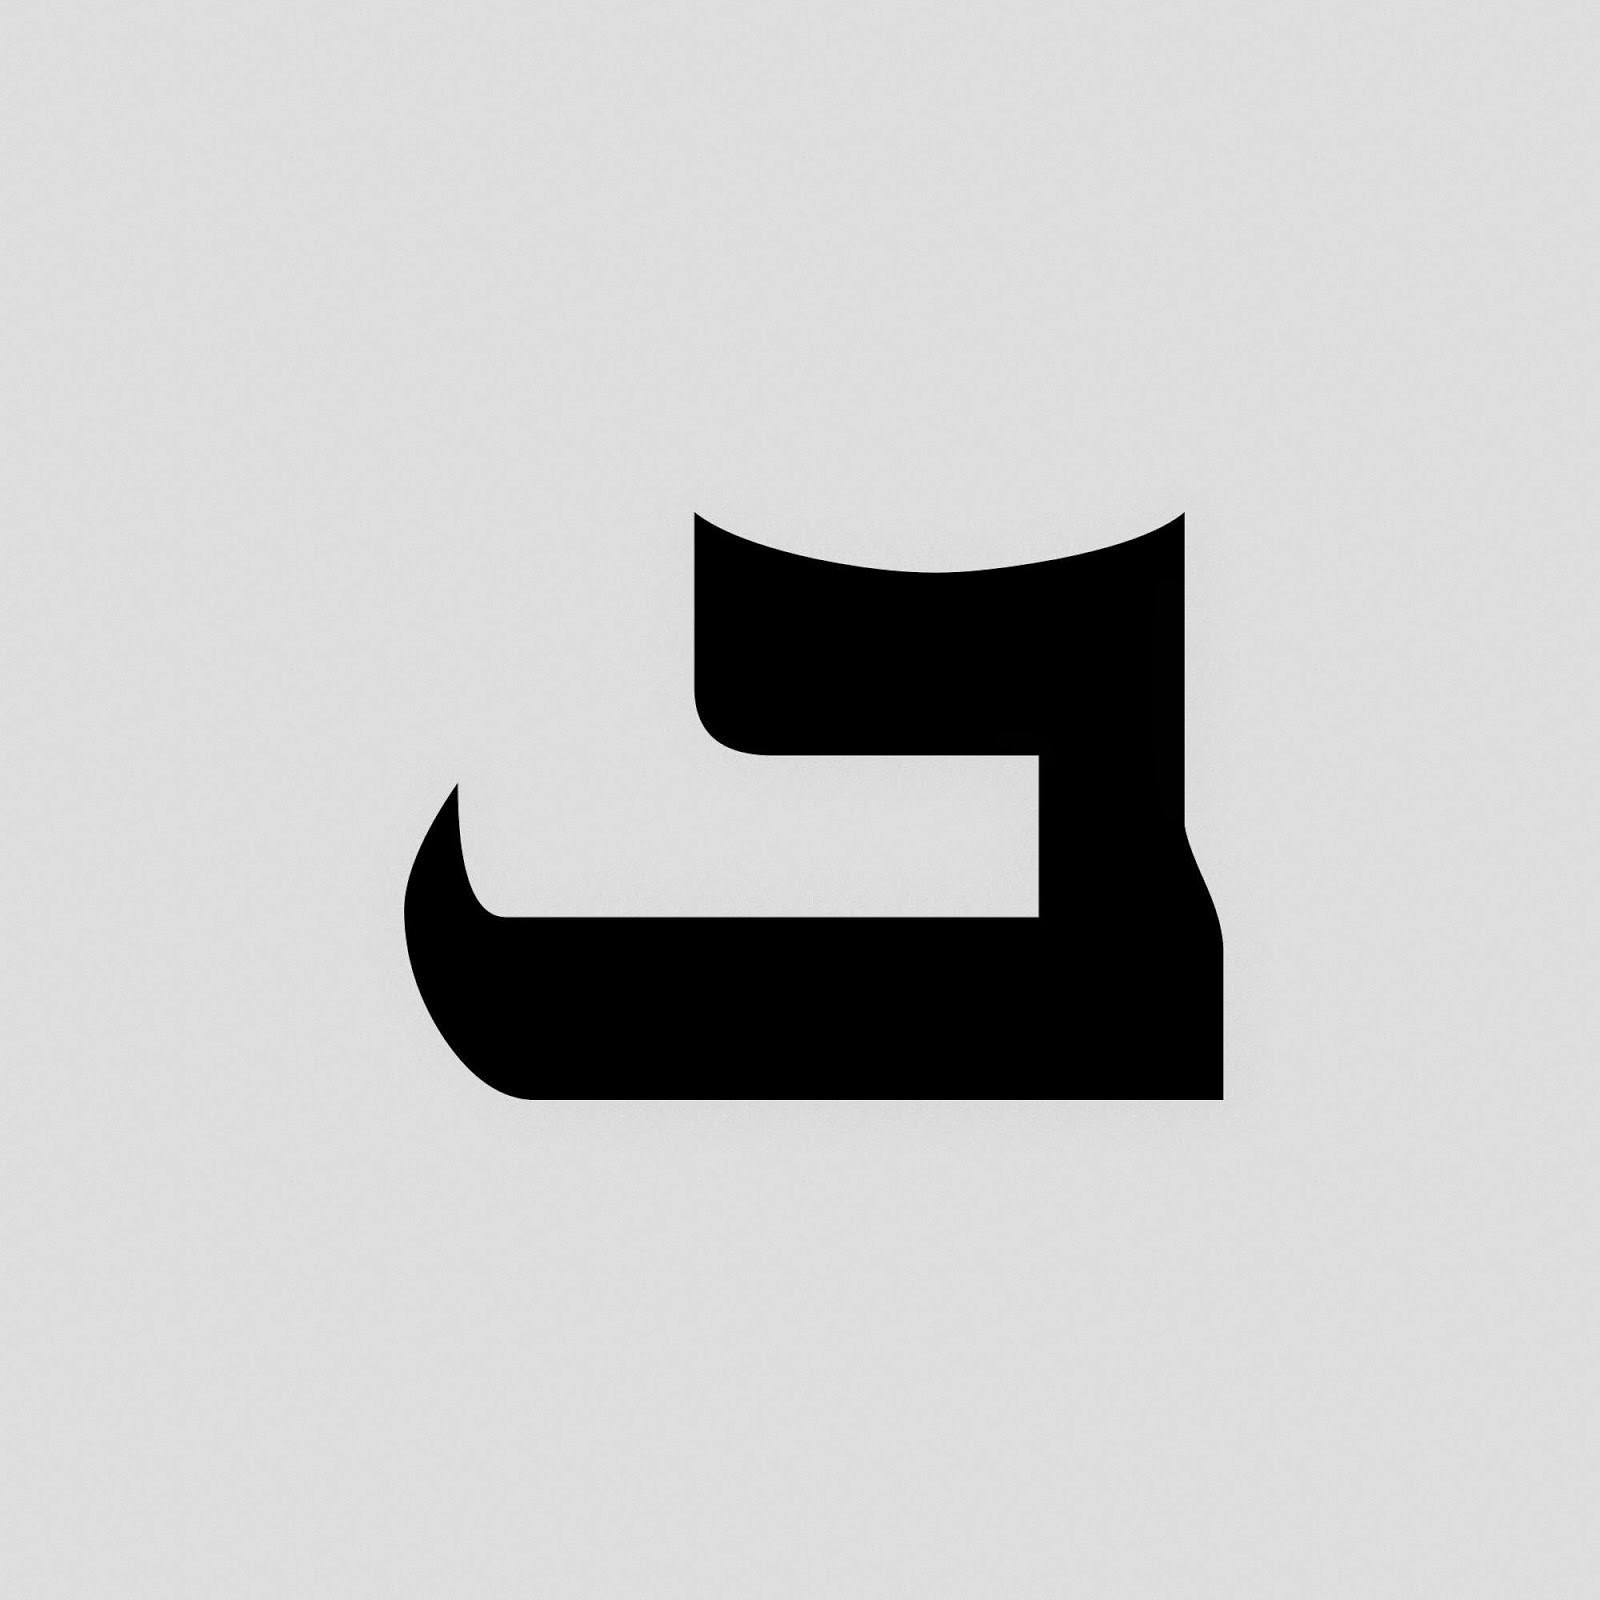 android syriac font